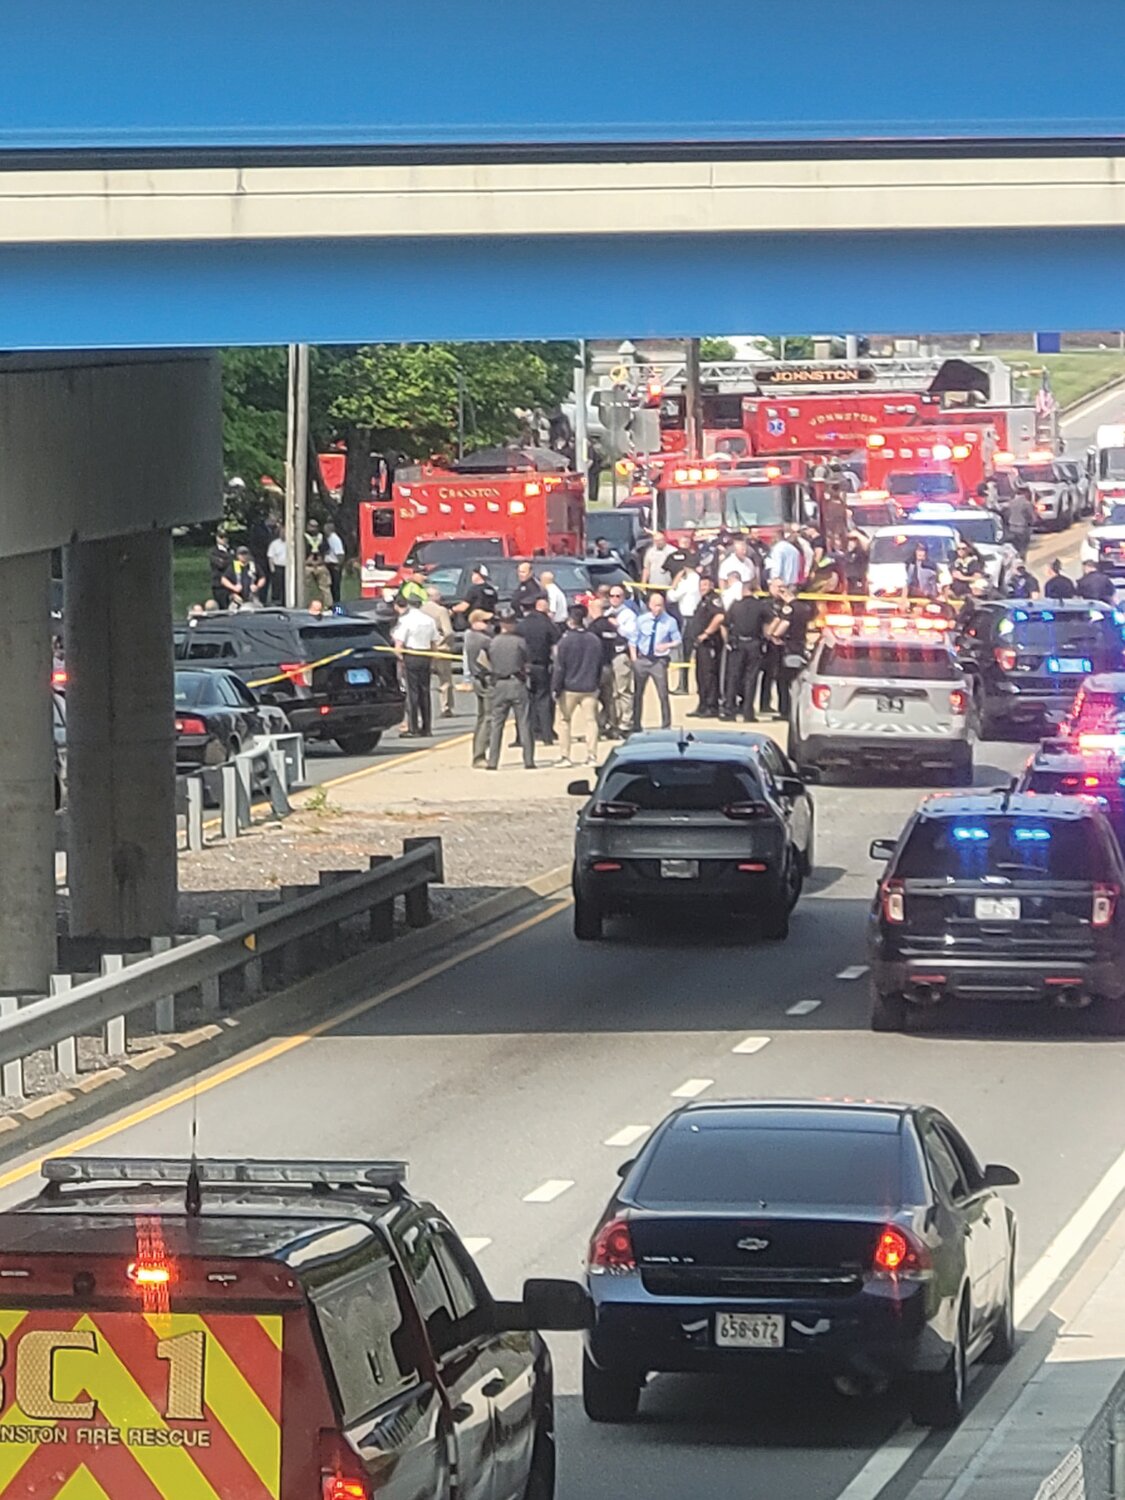 HEAVY POLICE PRESENCE: Police from multiple departments converged on a shooting suspect’s car along Plainfield Pike, on the Johnston/Cranston border, early Wednesday morning.